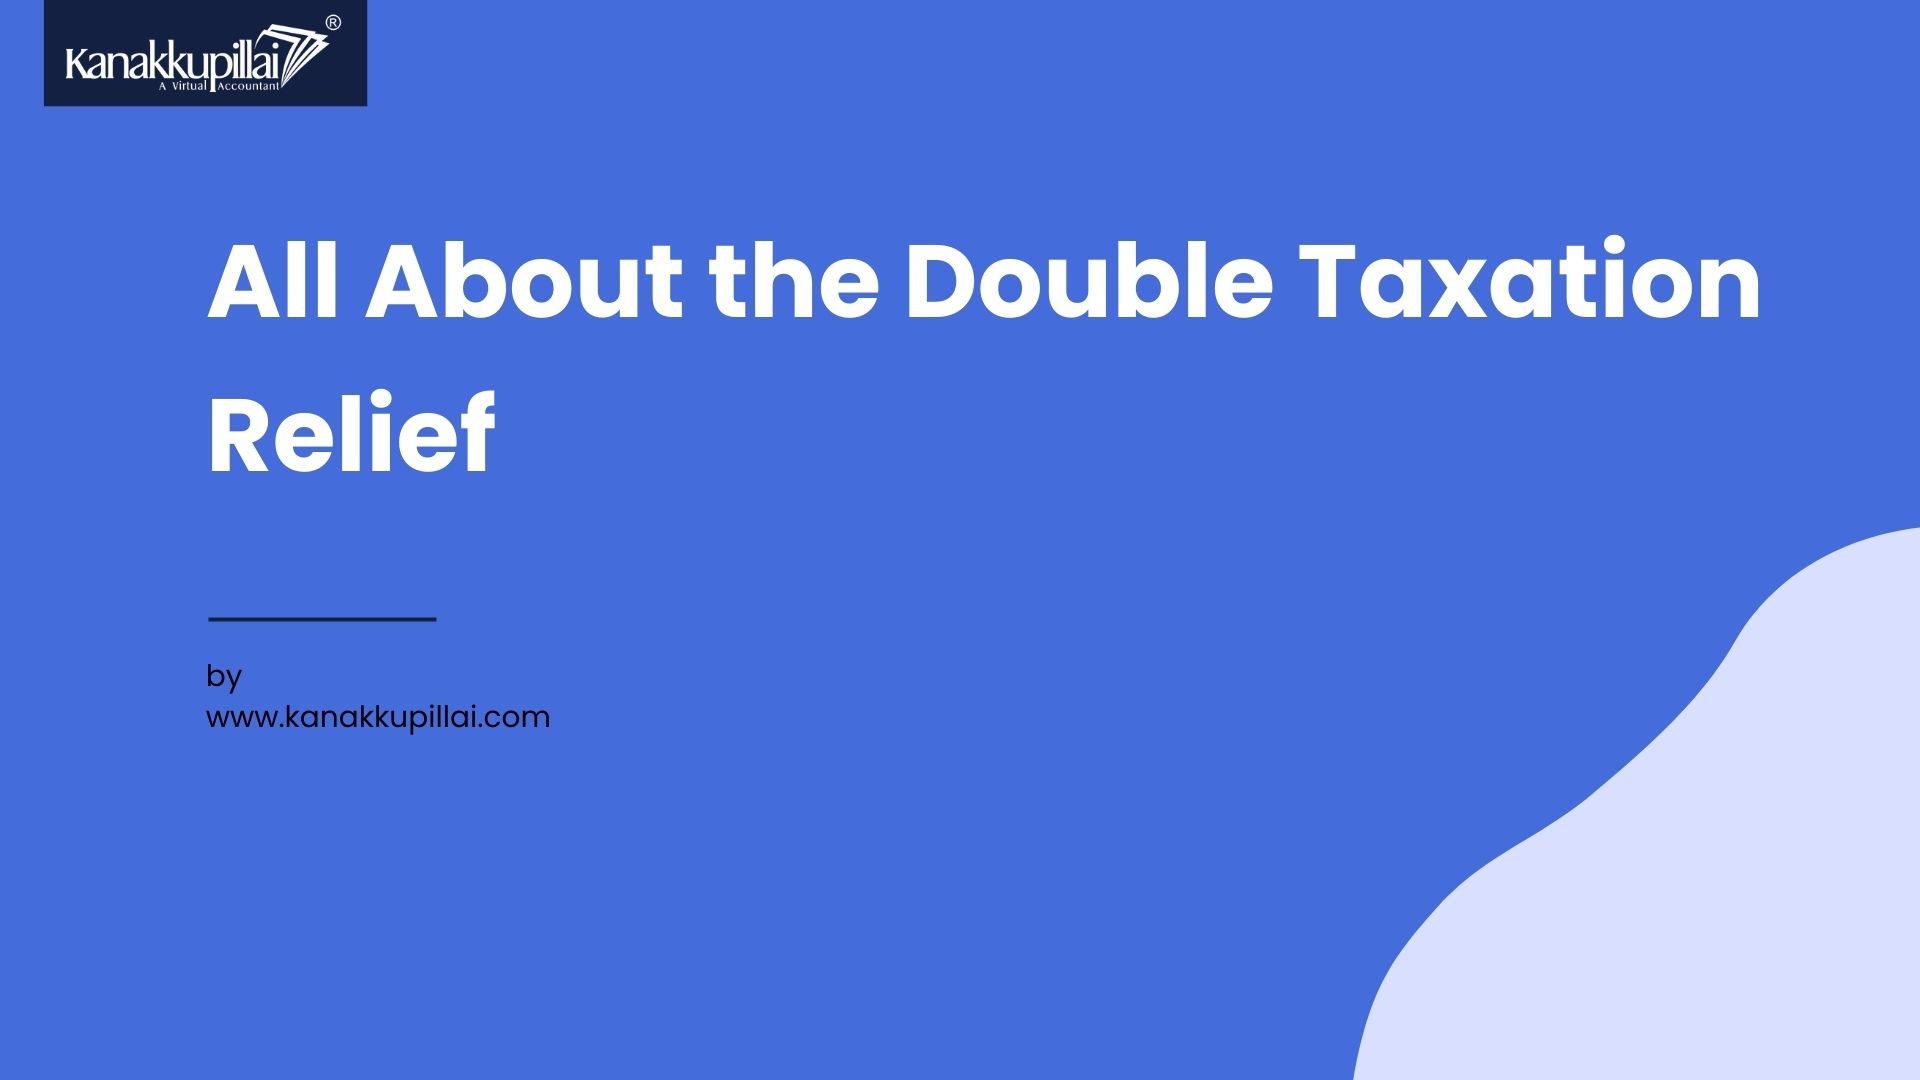 All About the Double Taxation Relief